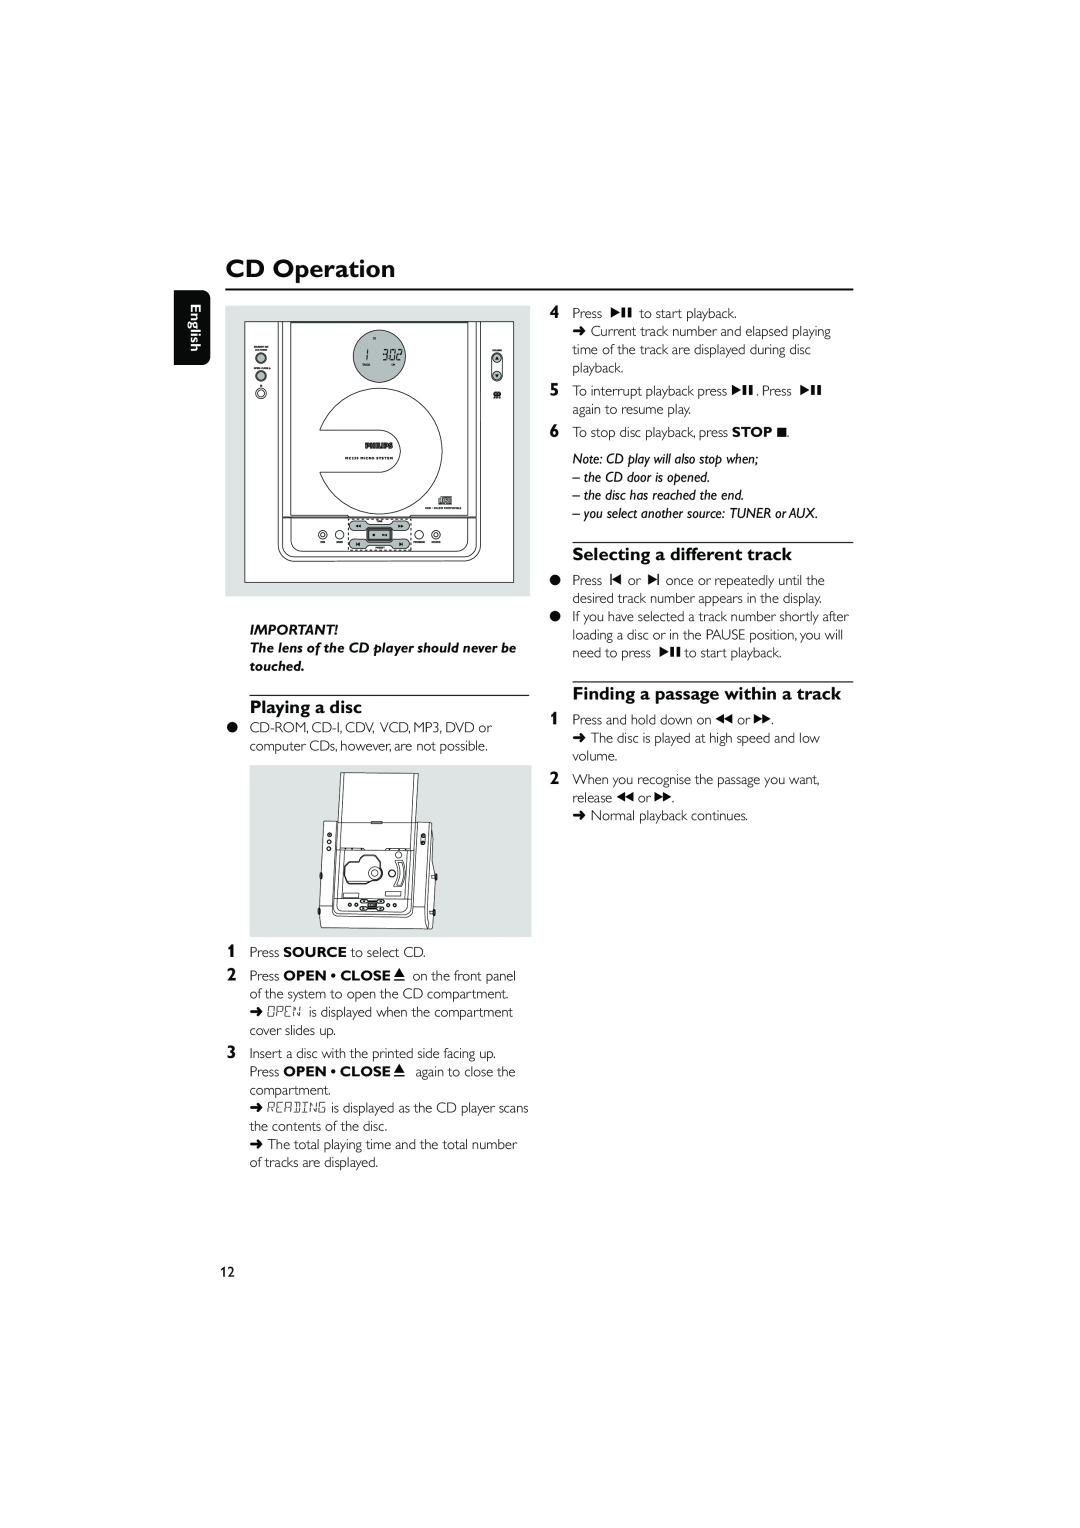 Philips MC230 user manual CD Operation, Selecting a different track, Playing a disc, Finding a passage within a track 